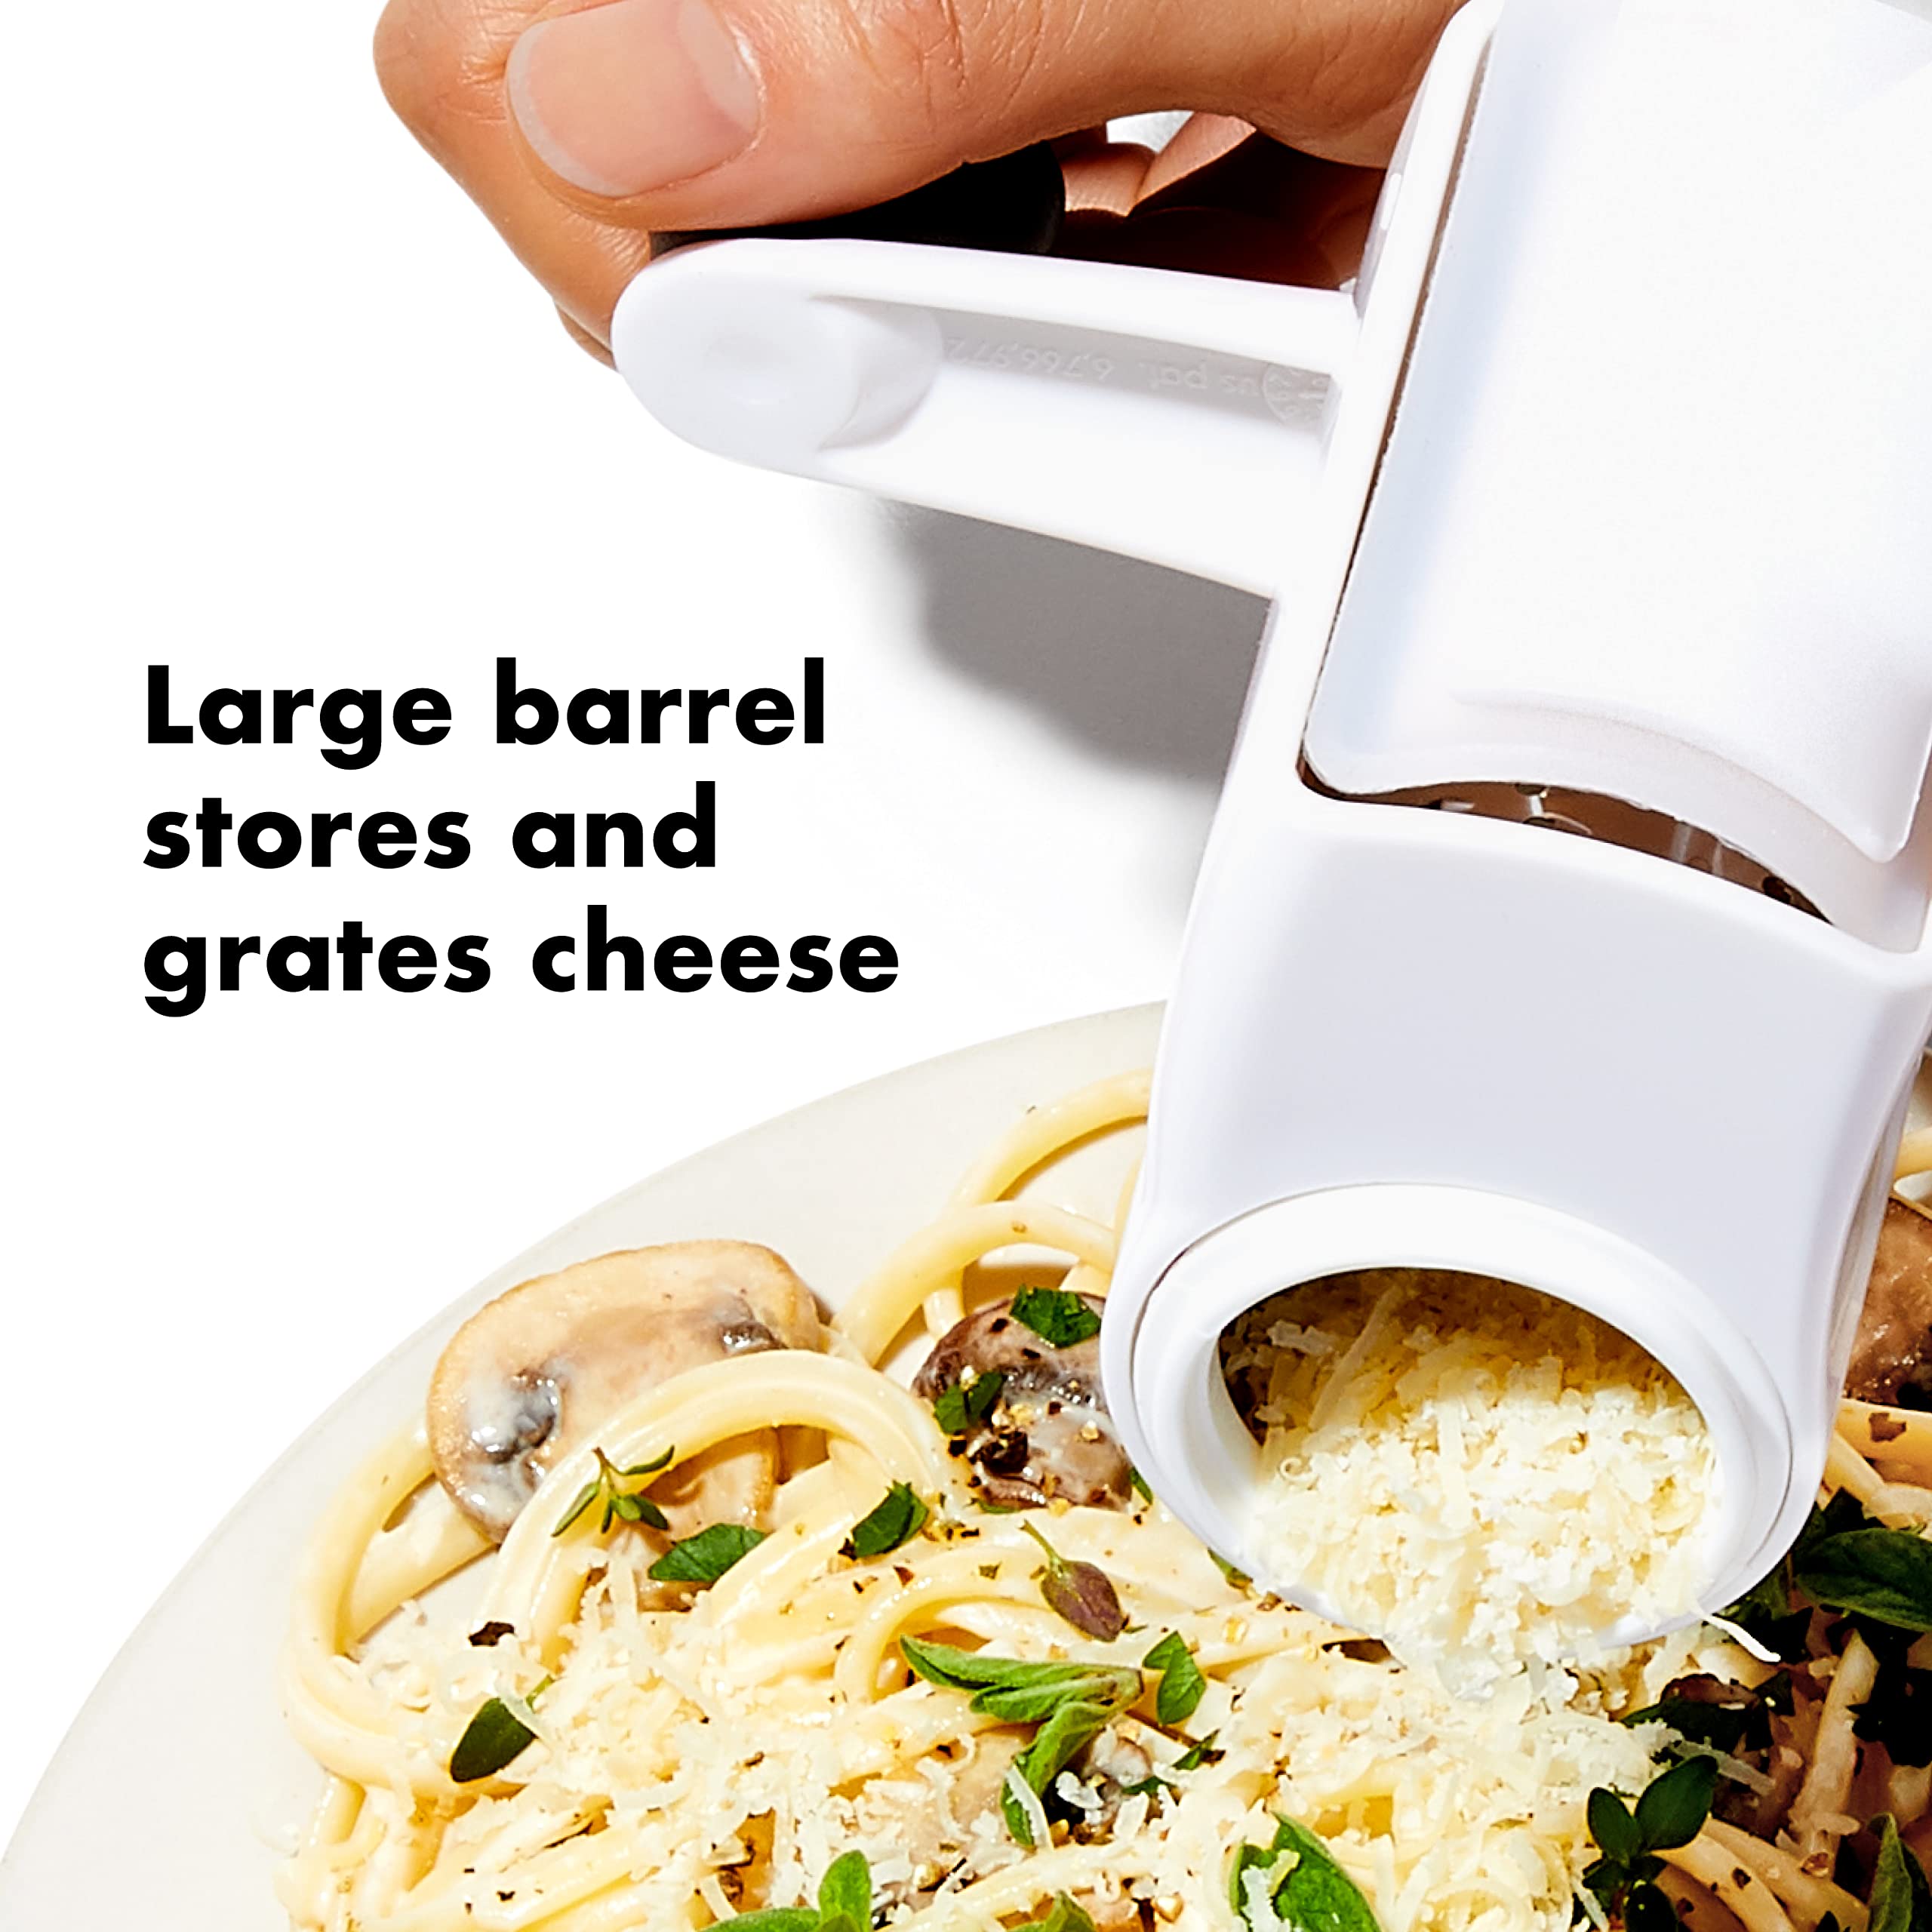 OXO Good Grips Rotary Grater,White